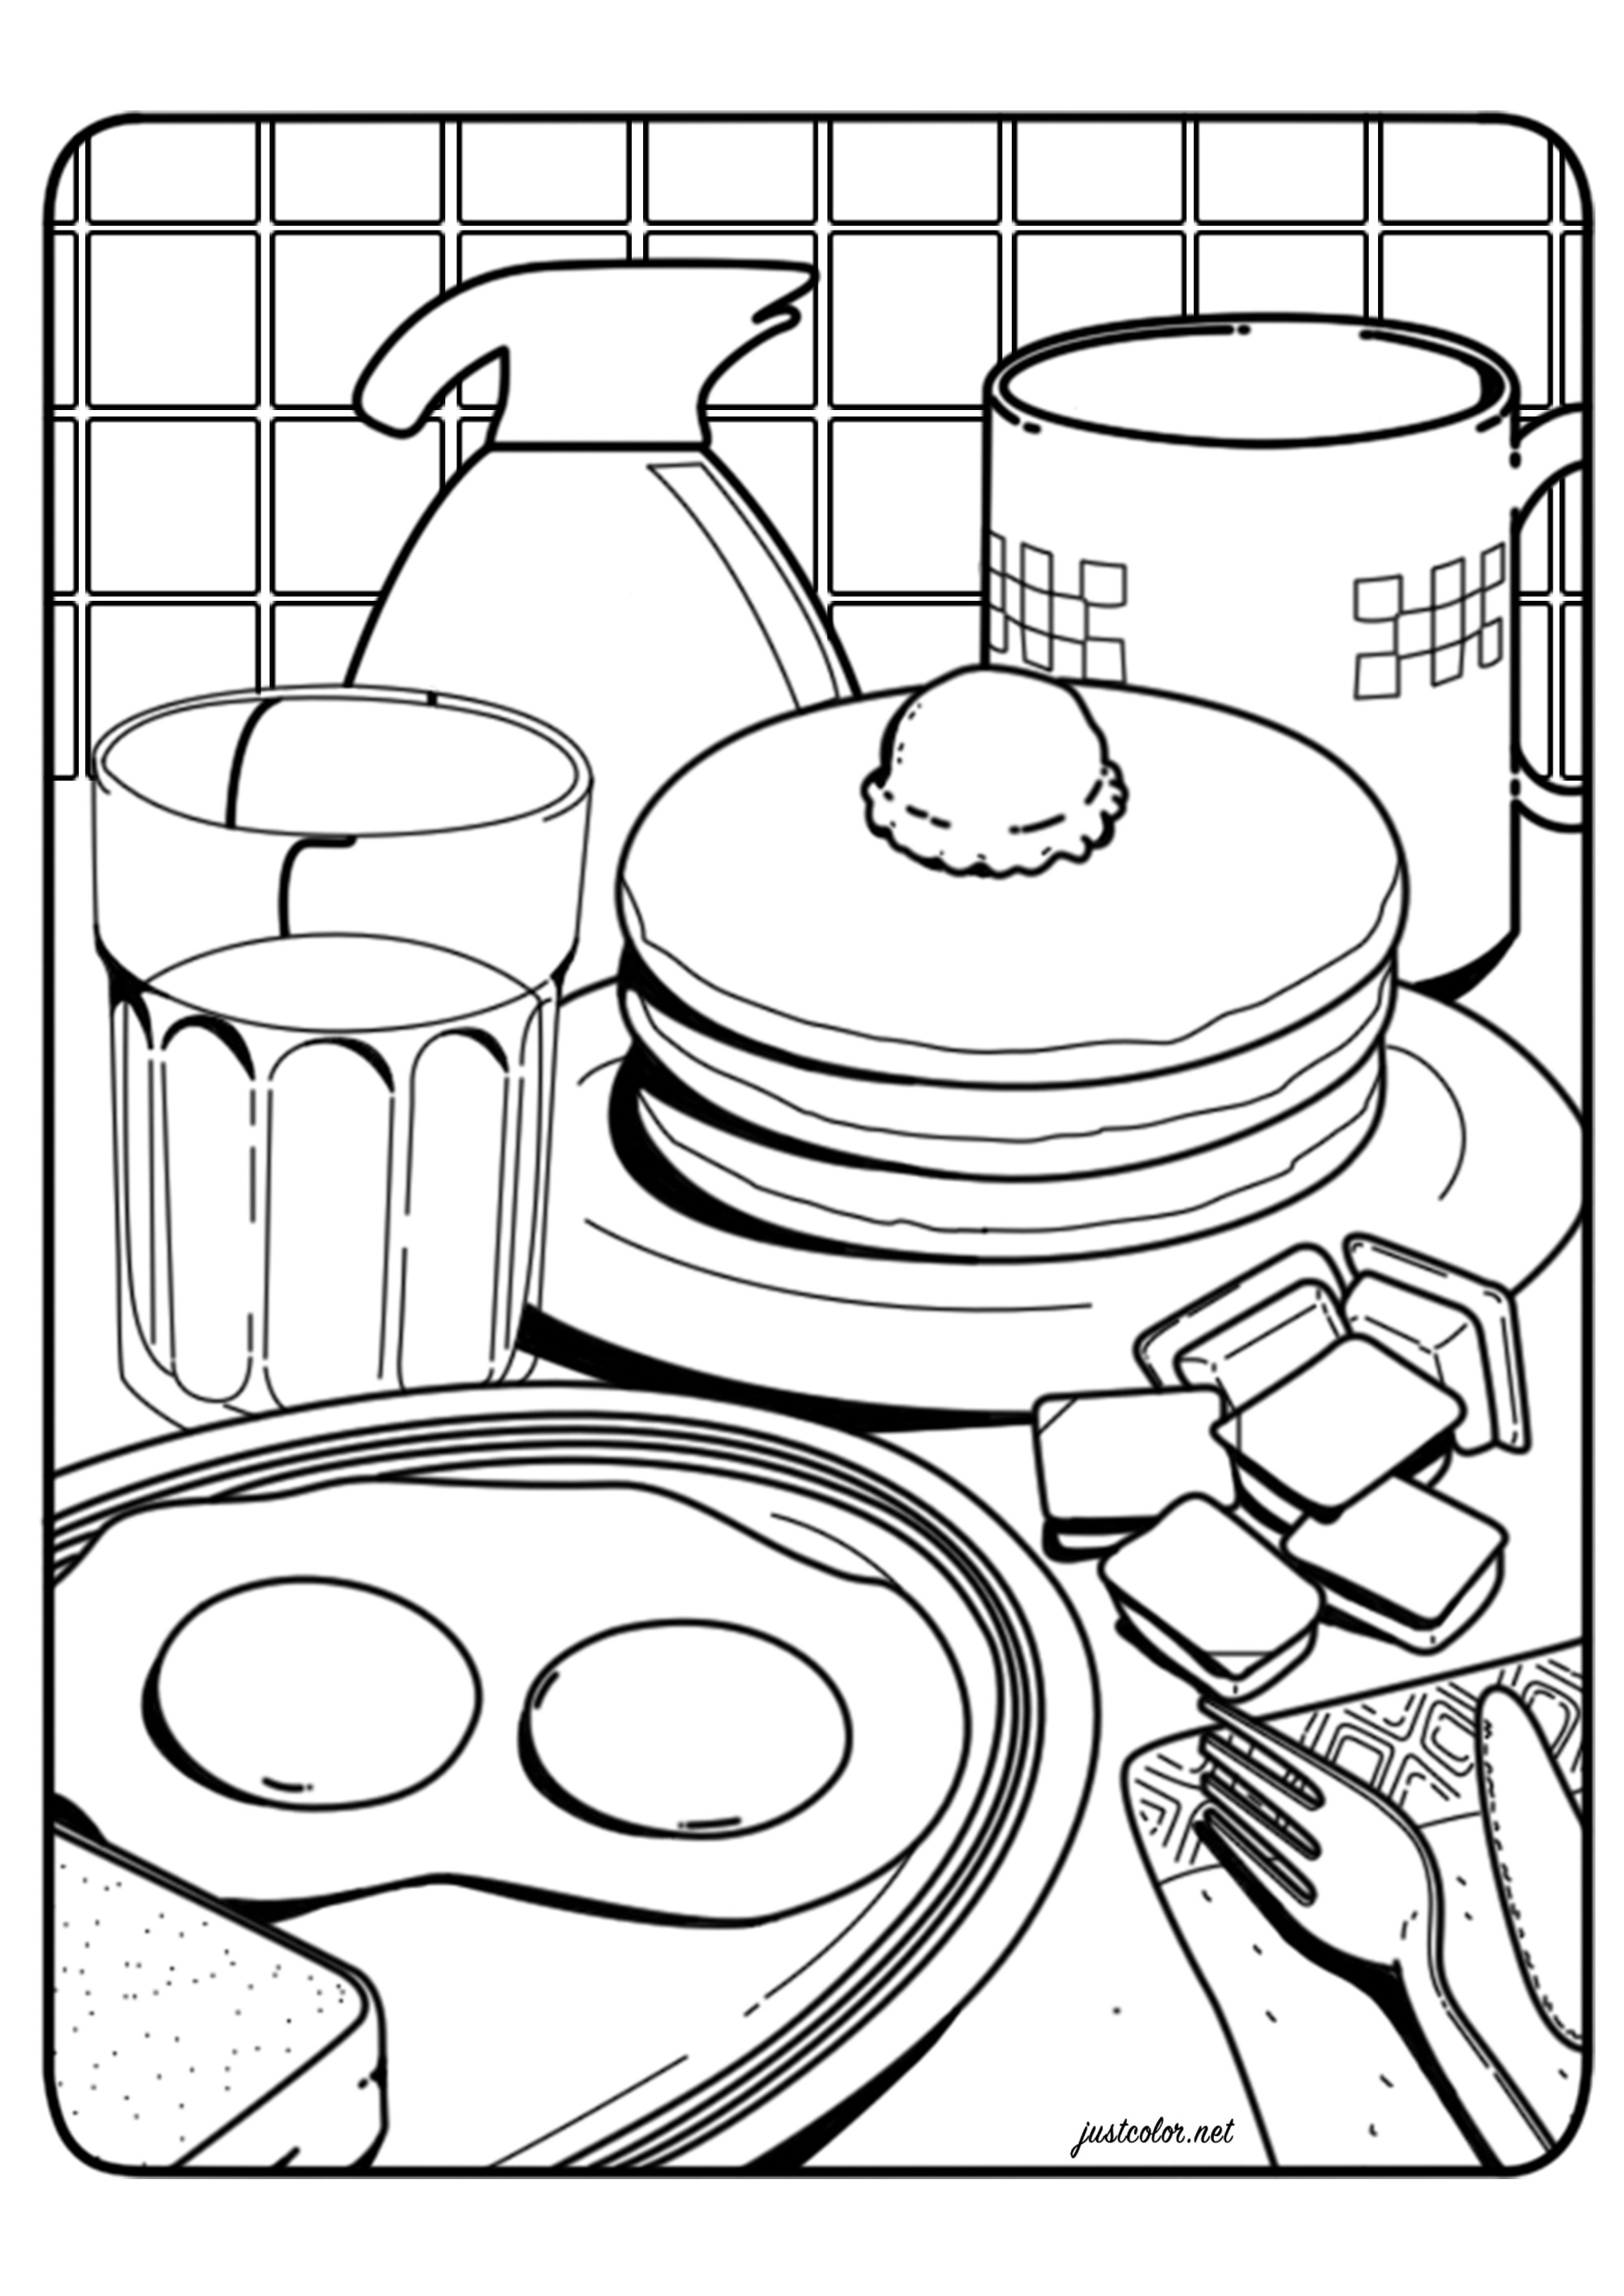 A good breakfast with fried eggs, pancakes, coffee...  a coloring page inspired by the illustration 'The Breakfast' by Lauren Martin